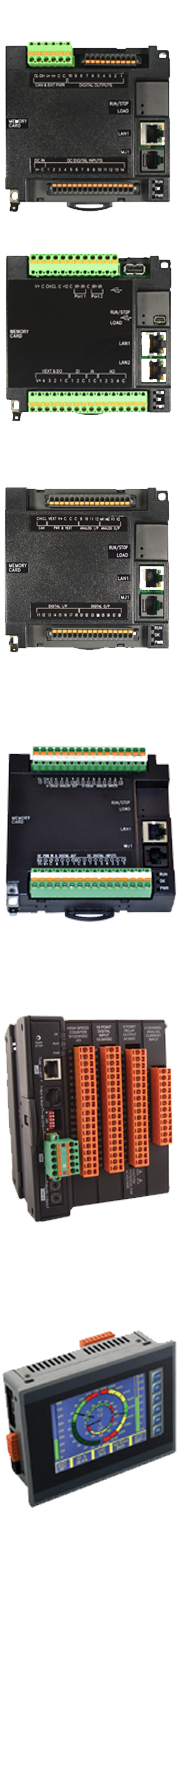 Horner Automation 
All-In-One Controllers